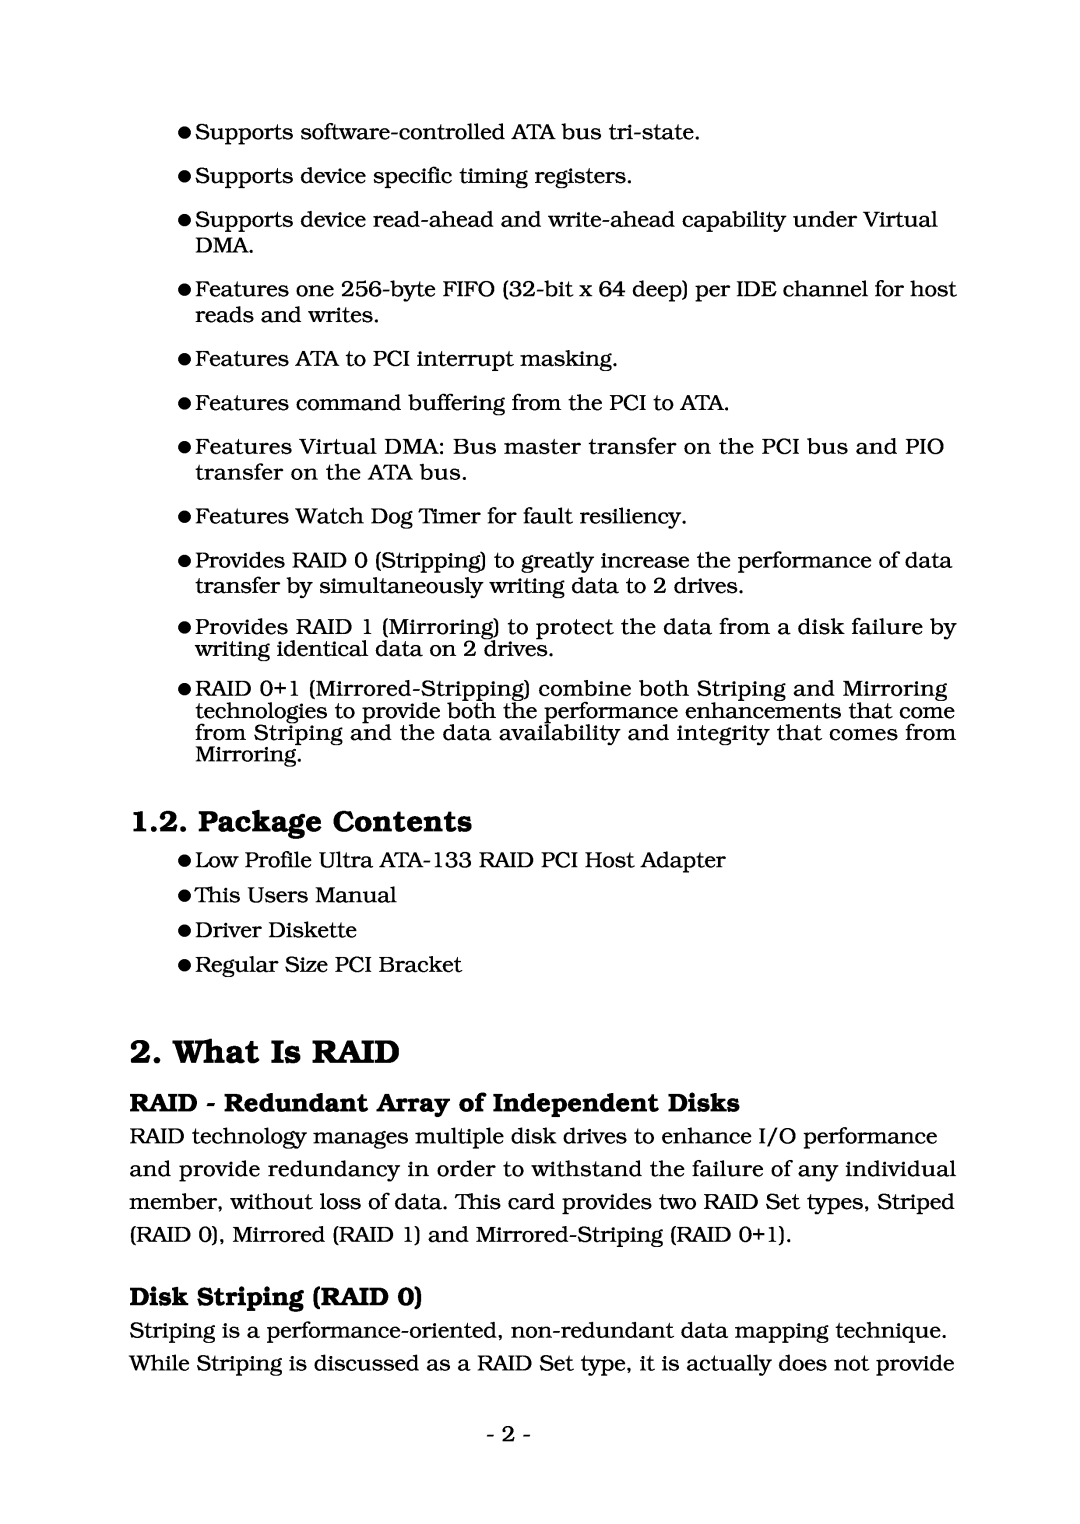 Lindy ATA-133 manual What Is RAID, Package Contents, RAID - Redundant Array of Independent Disks, Disk Striping RAID 